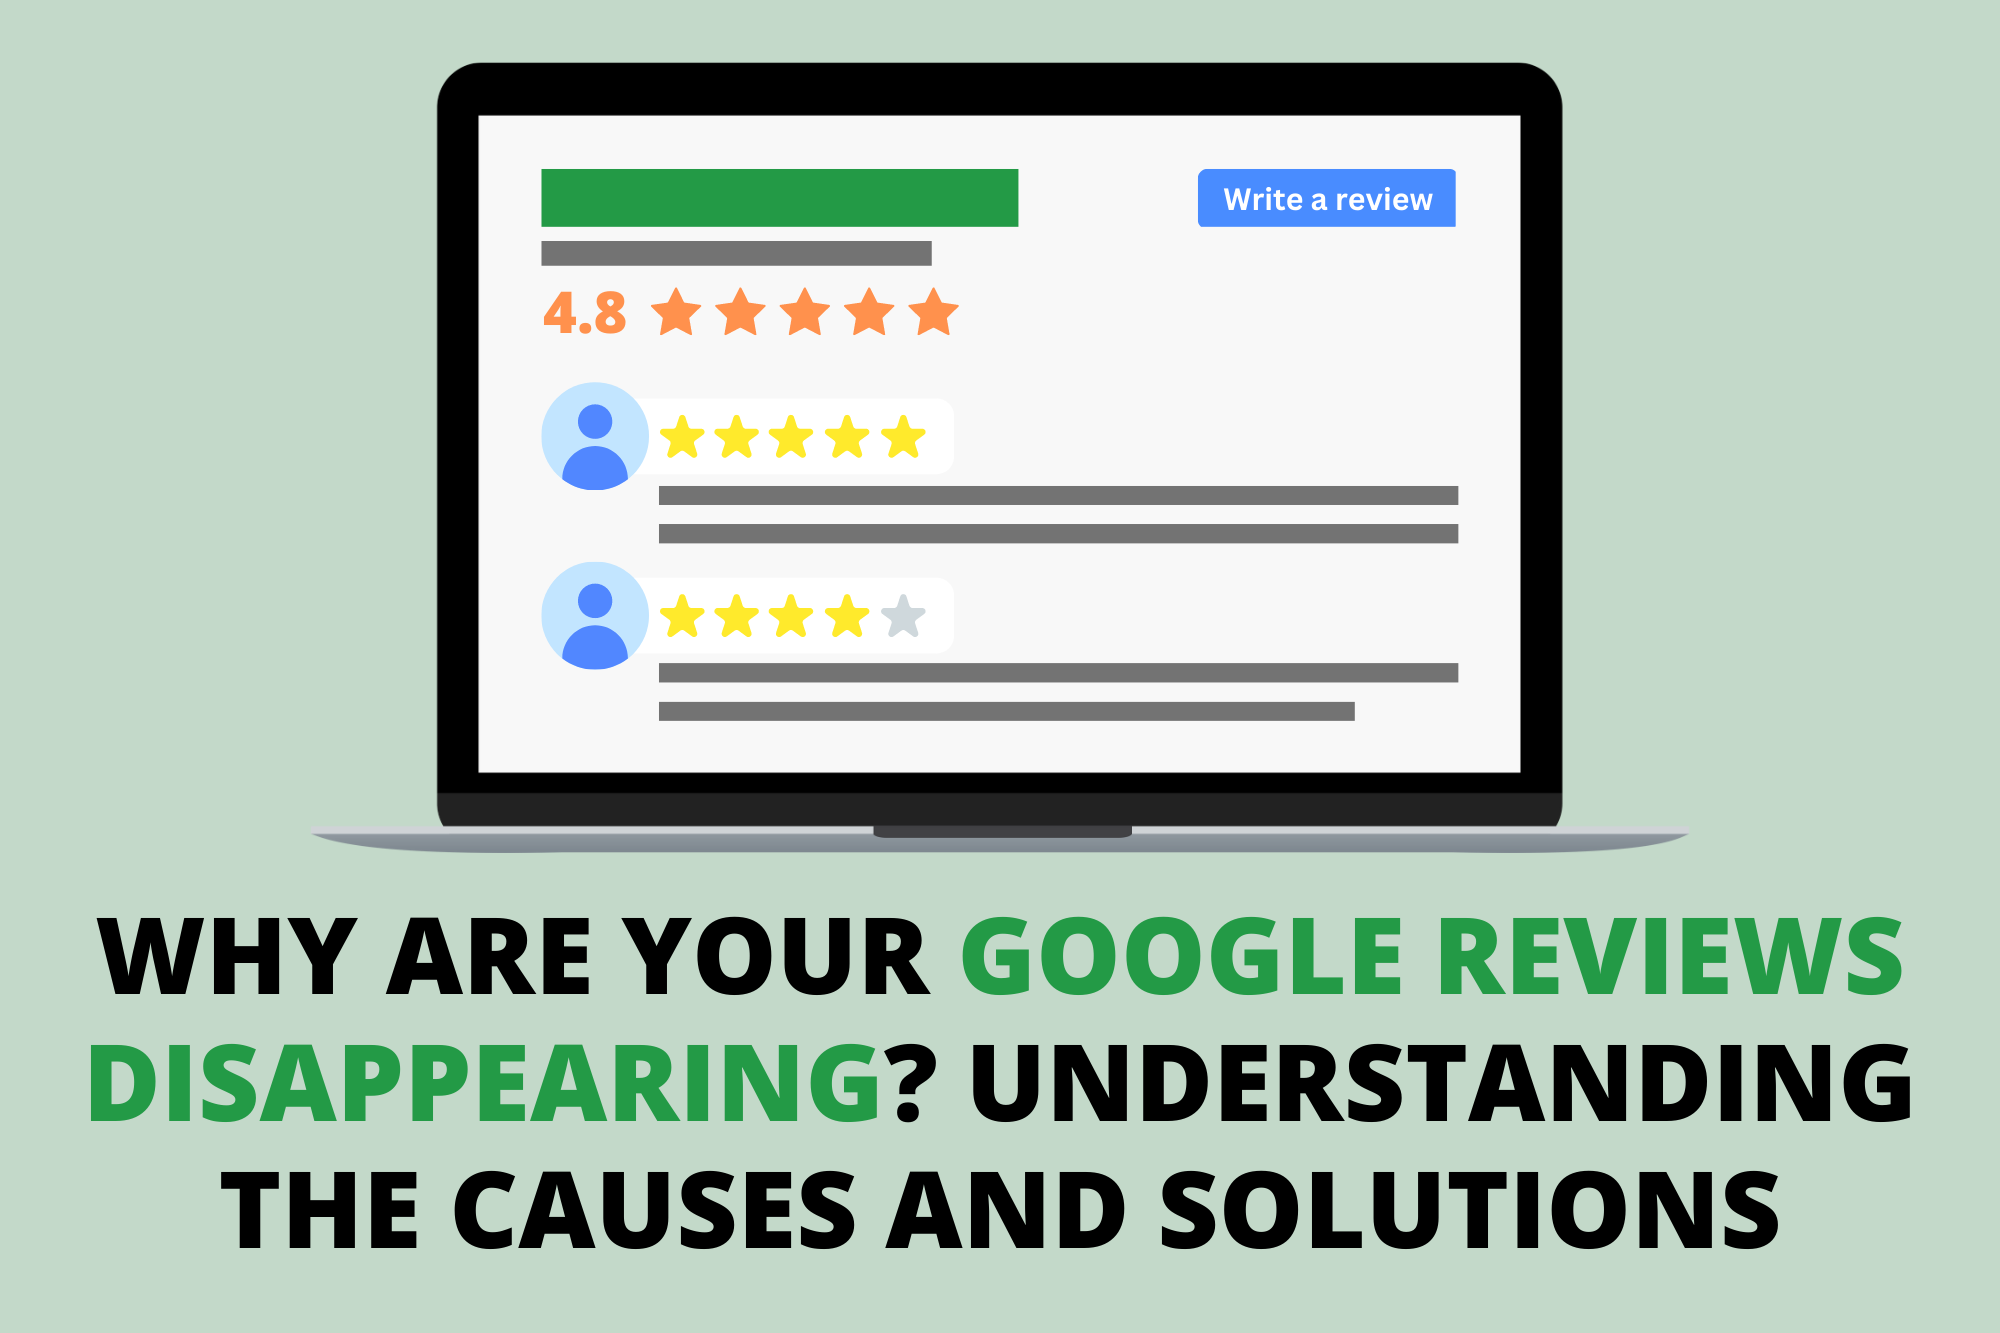 Why Are Your Google Reviews Disappearing? Understanding the Causes and Solutions